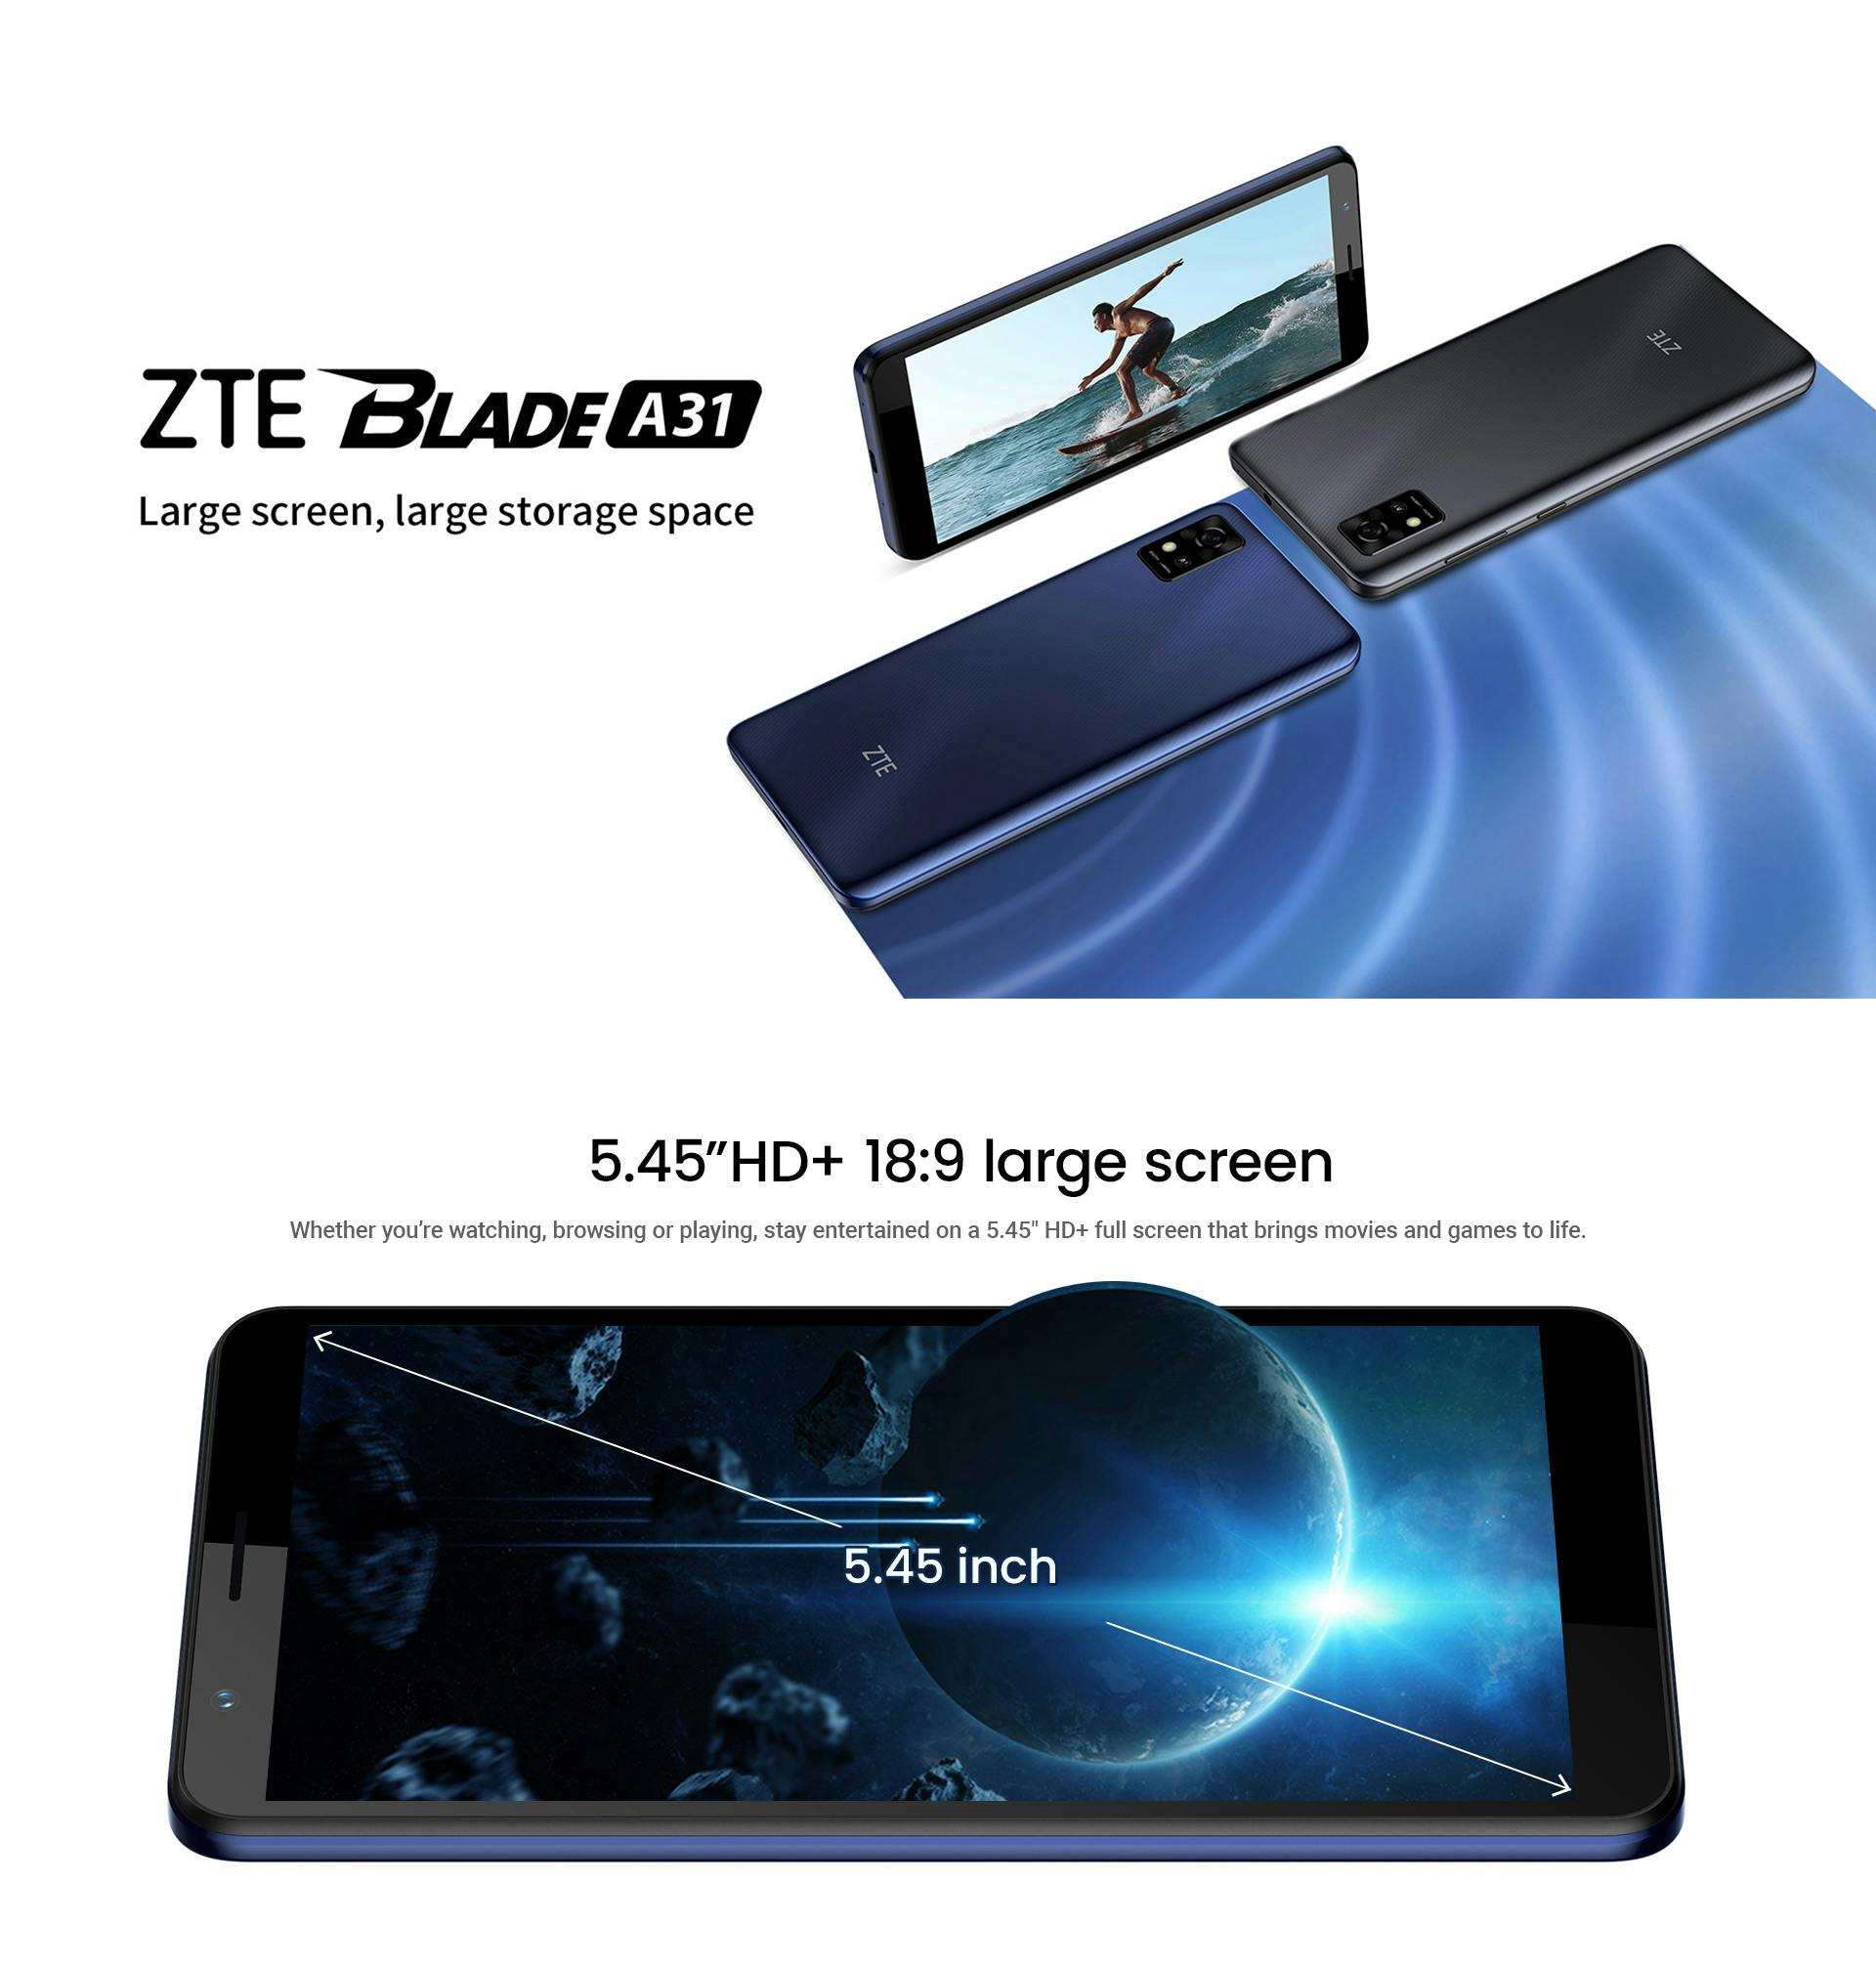  ZTE Blade A31 5.45 18:9 Display, 8MP Camera Octa-Core Android  11 Go (LTE USA Latin Caribbean) 4G LTE GSM Unlocked Smartphone -  International Version (Grey) : Cell Phones & Accessories